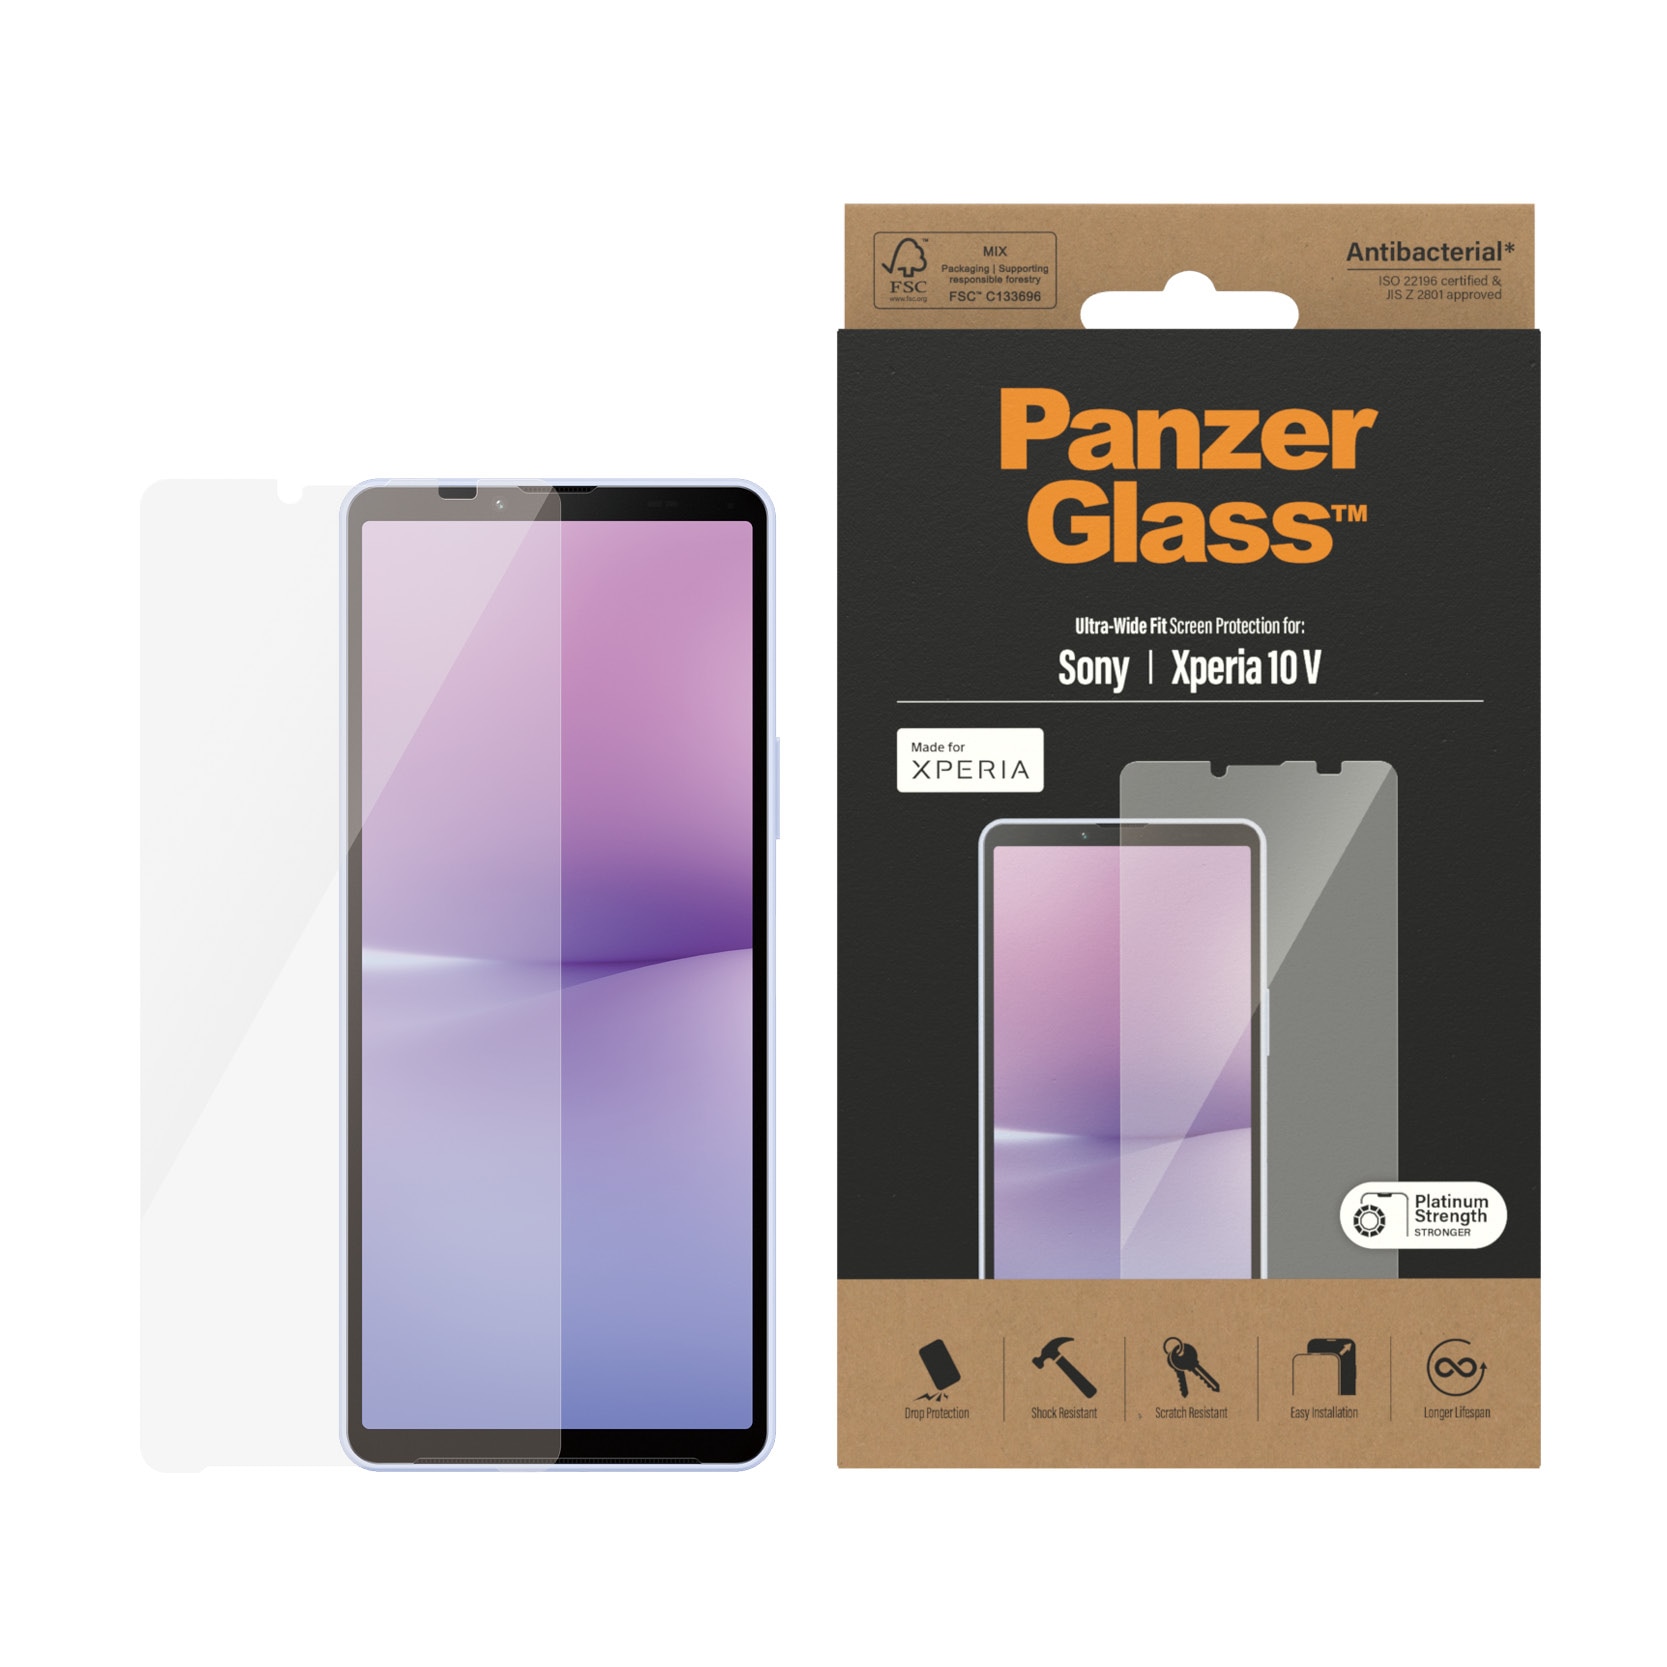 Sony Xperia 10 V Screen Protector Ultra Wide Fit